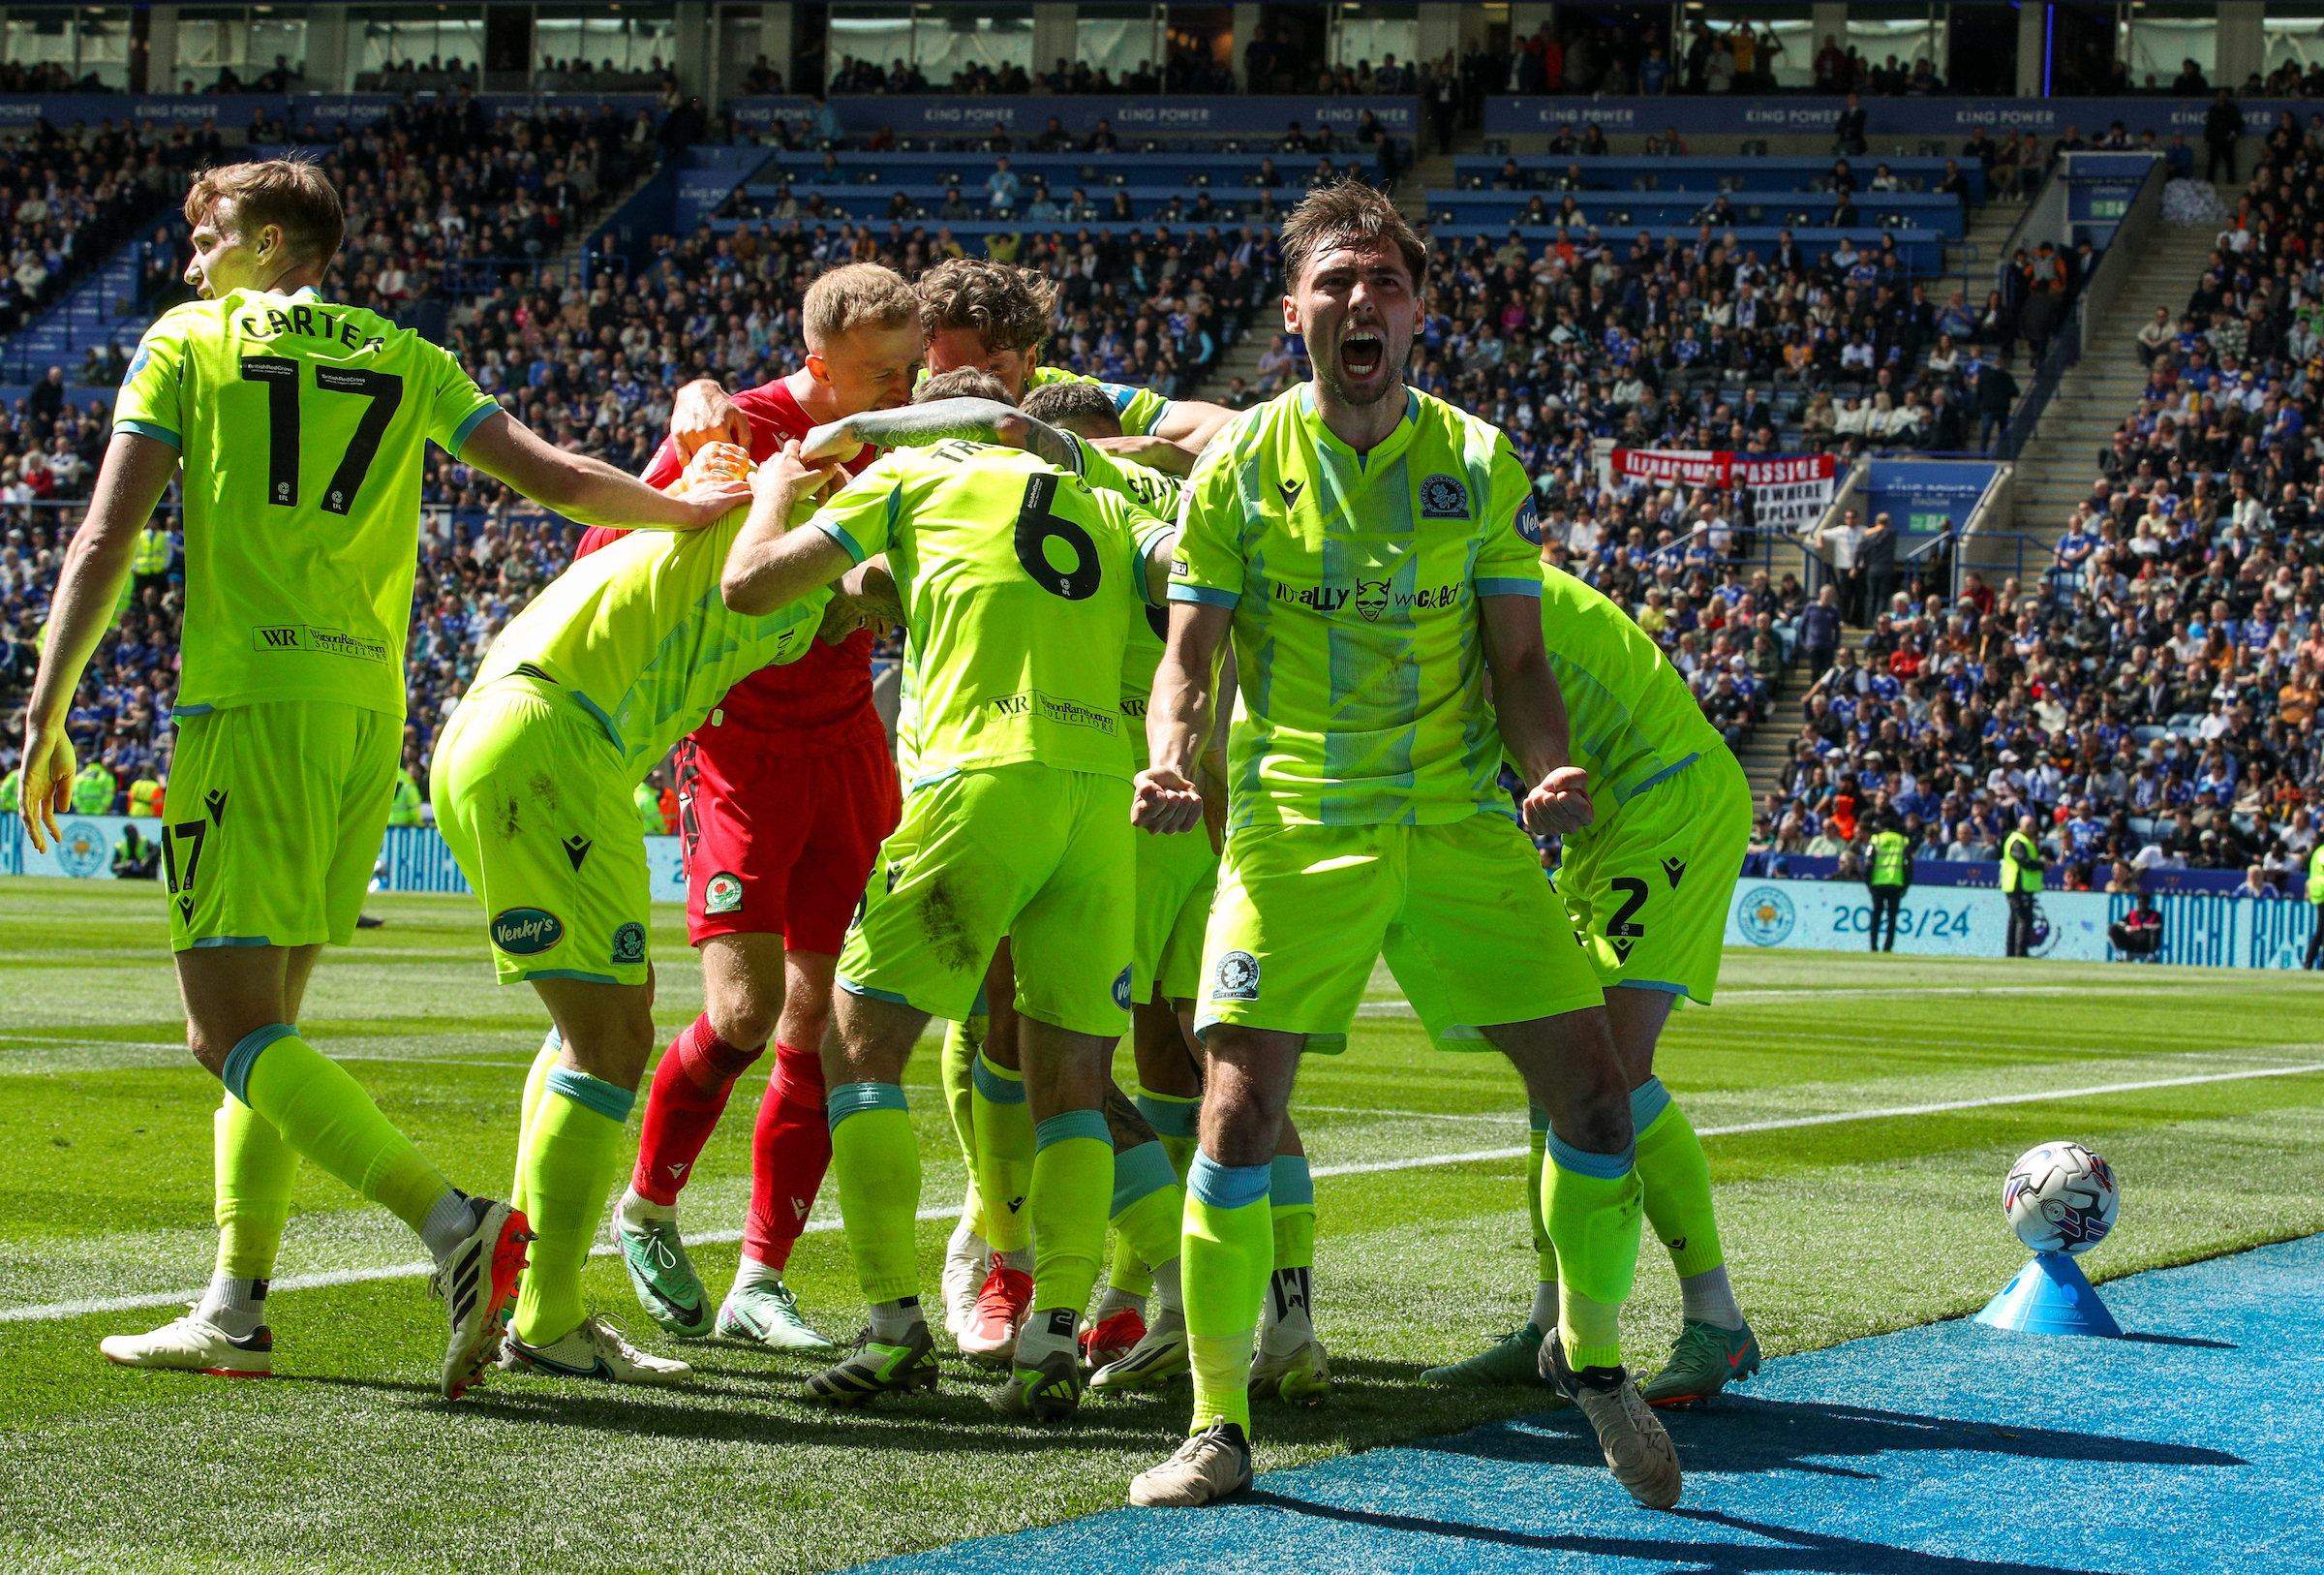 Blackburn Rovers: Pickering on support through ups and downs